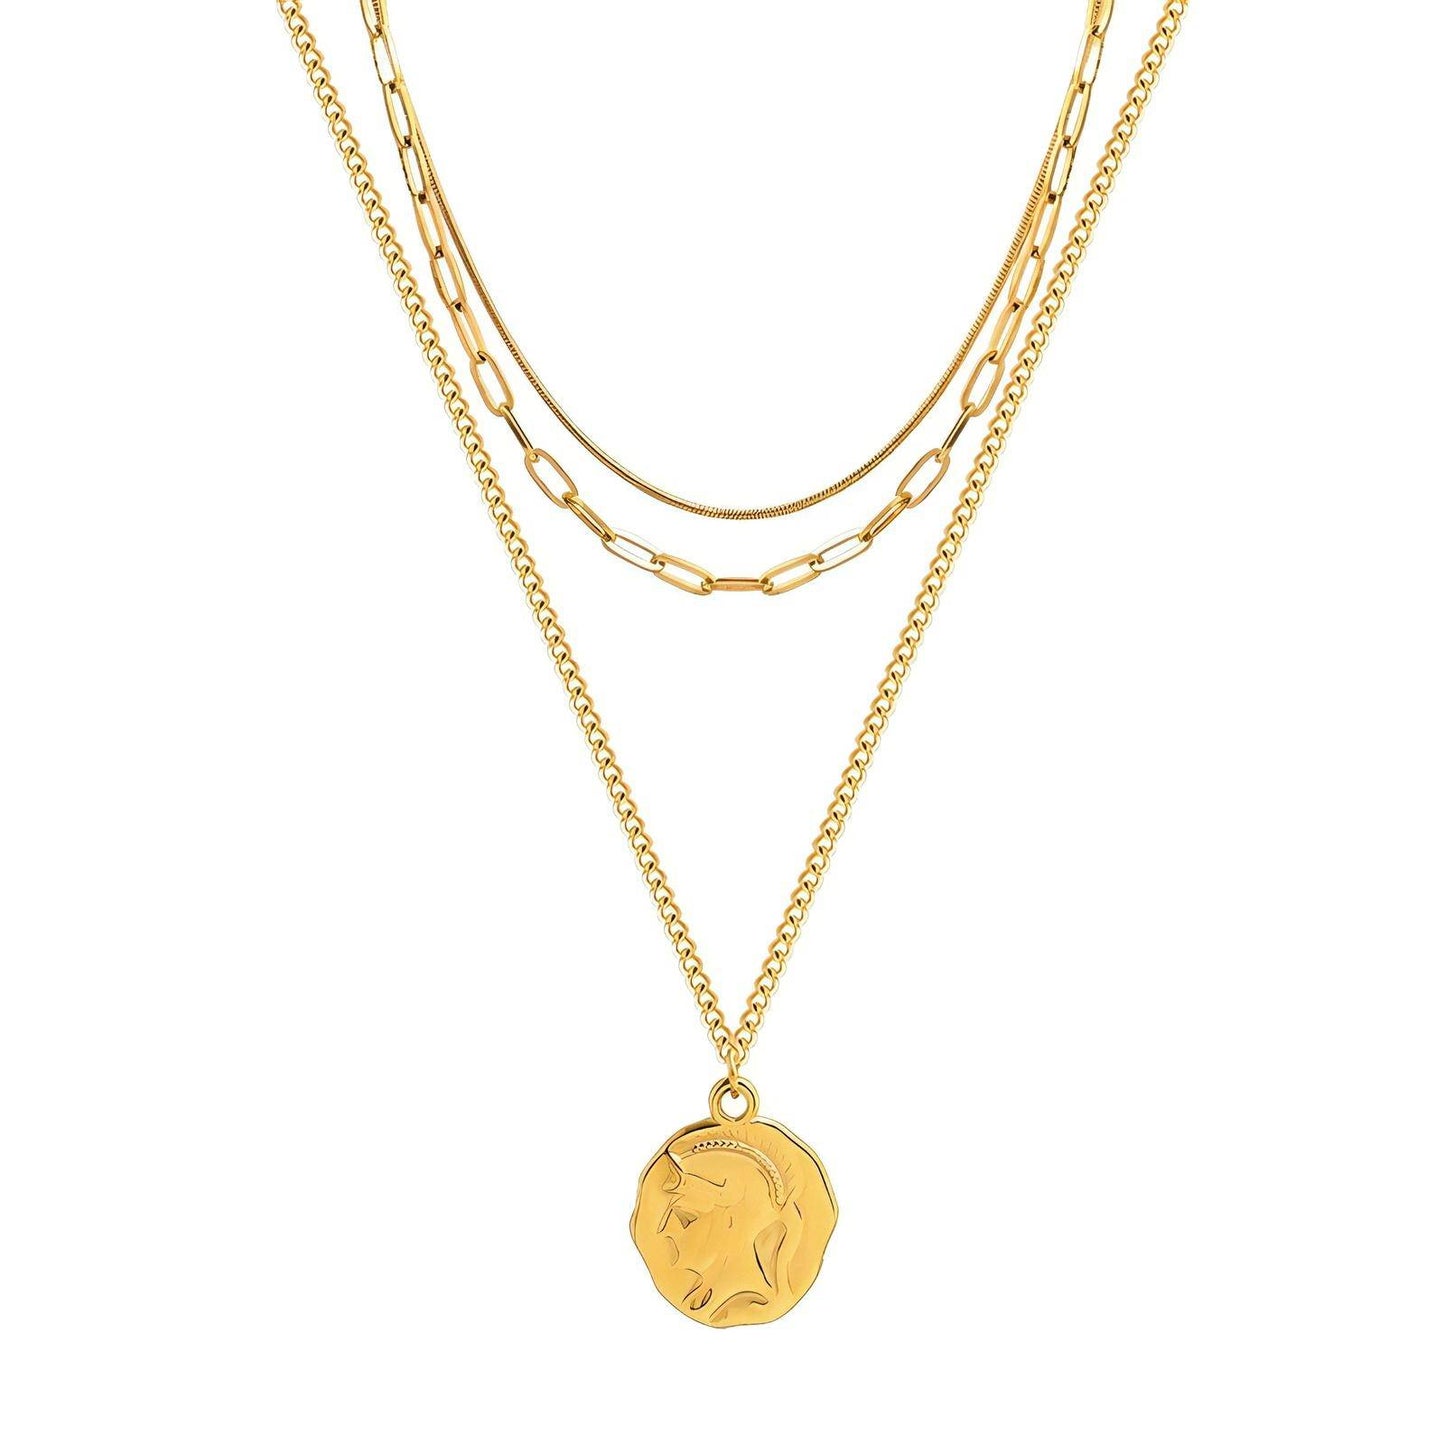 18K gold plated Stainless steel  Centurion necklace